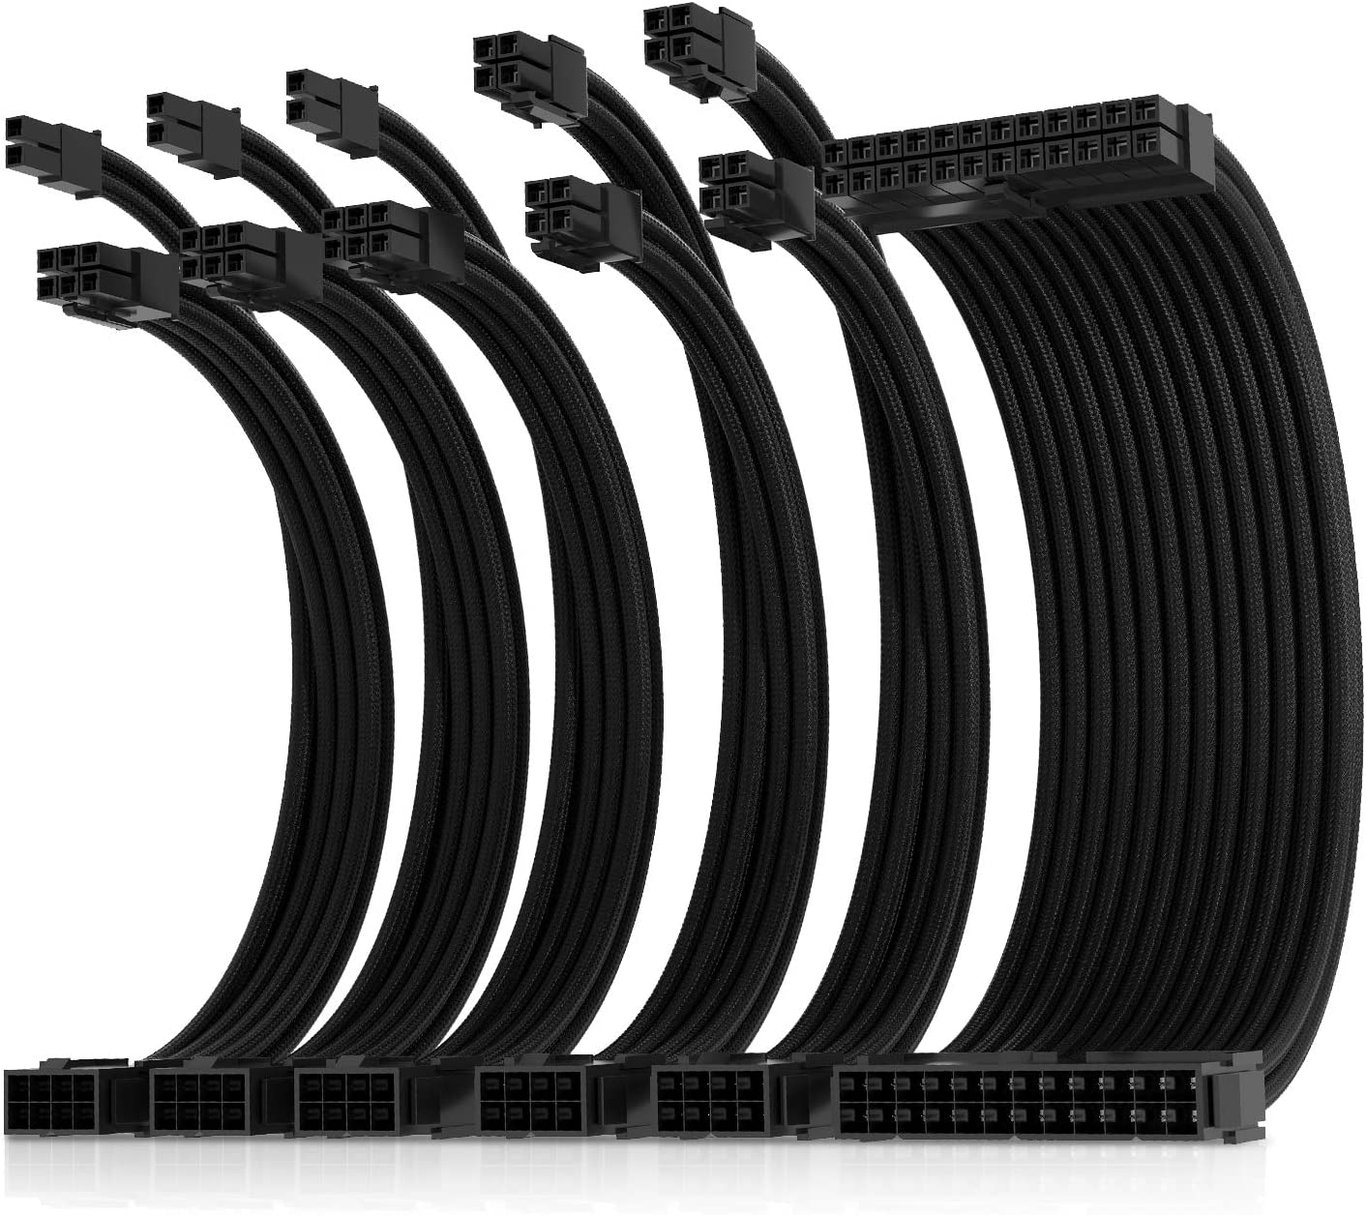 AsiaHorse Pro-6 Sleeved Extension Cable Kit - Black -1